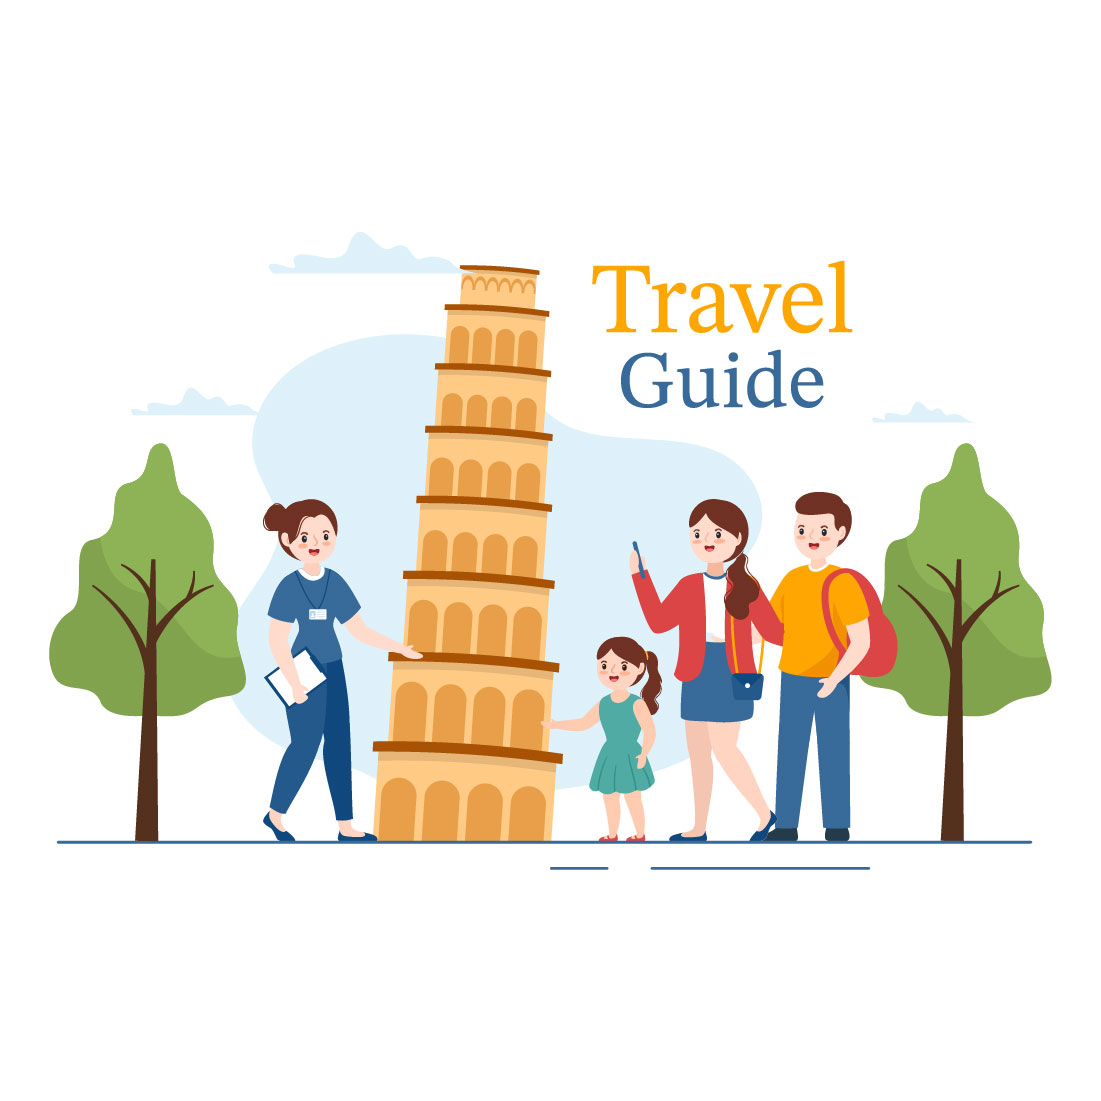 10 Travel Guide And Tour Illustration - main image preview.